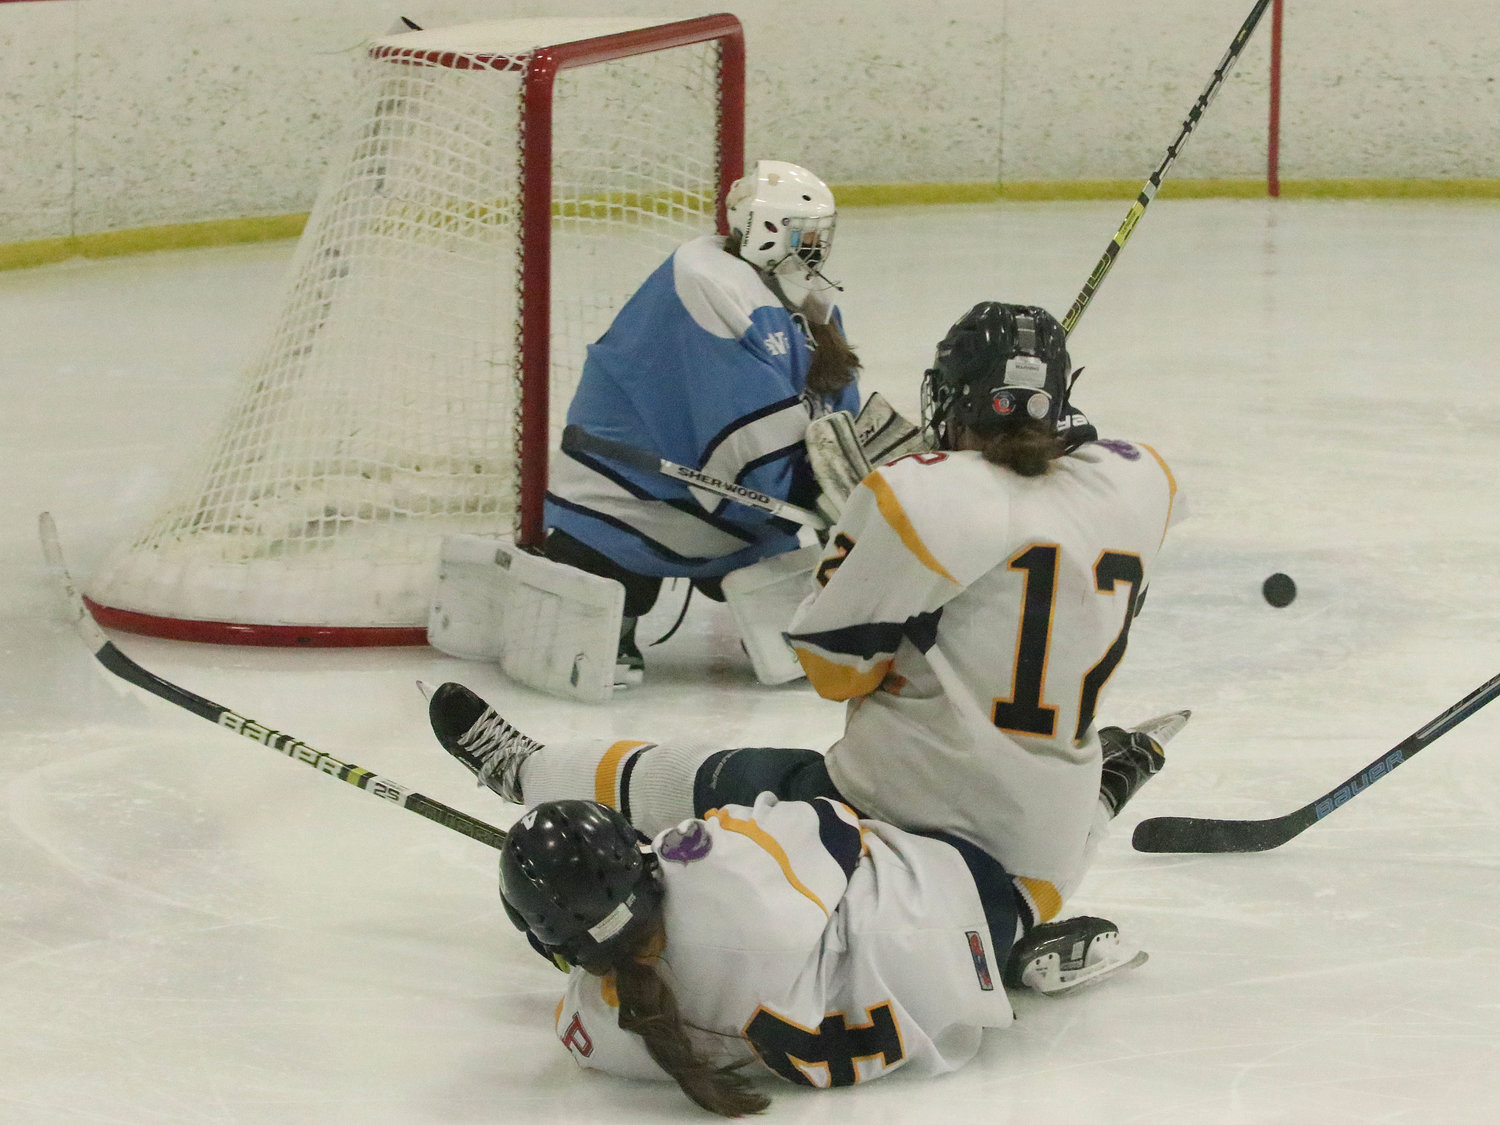 Forwards Marissa Levreault (left) and Kat Barker collide and slide away from the net after Barker got off a shot on goal in the waning moments of the third period of Game 2.